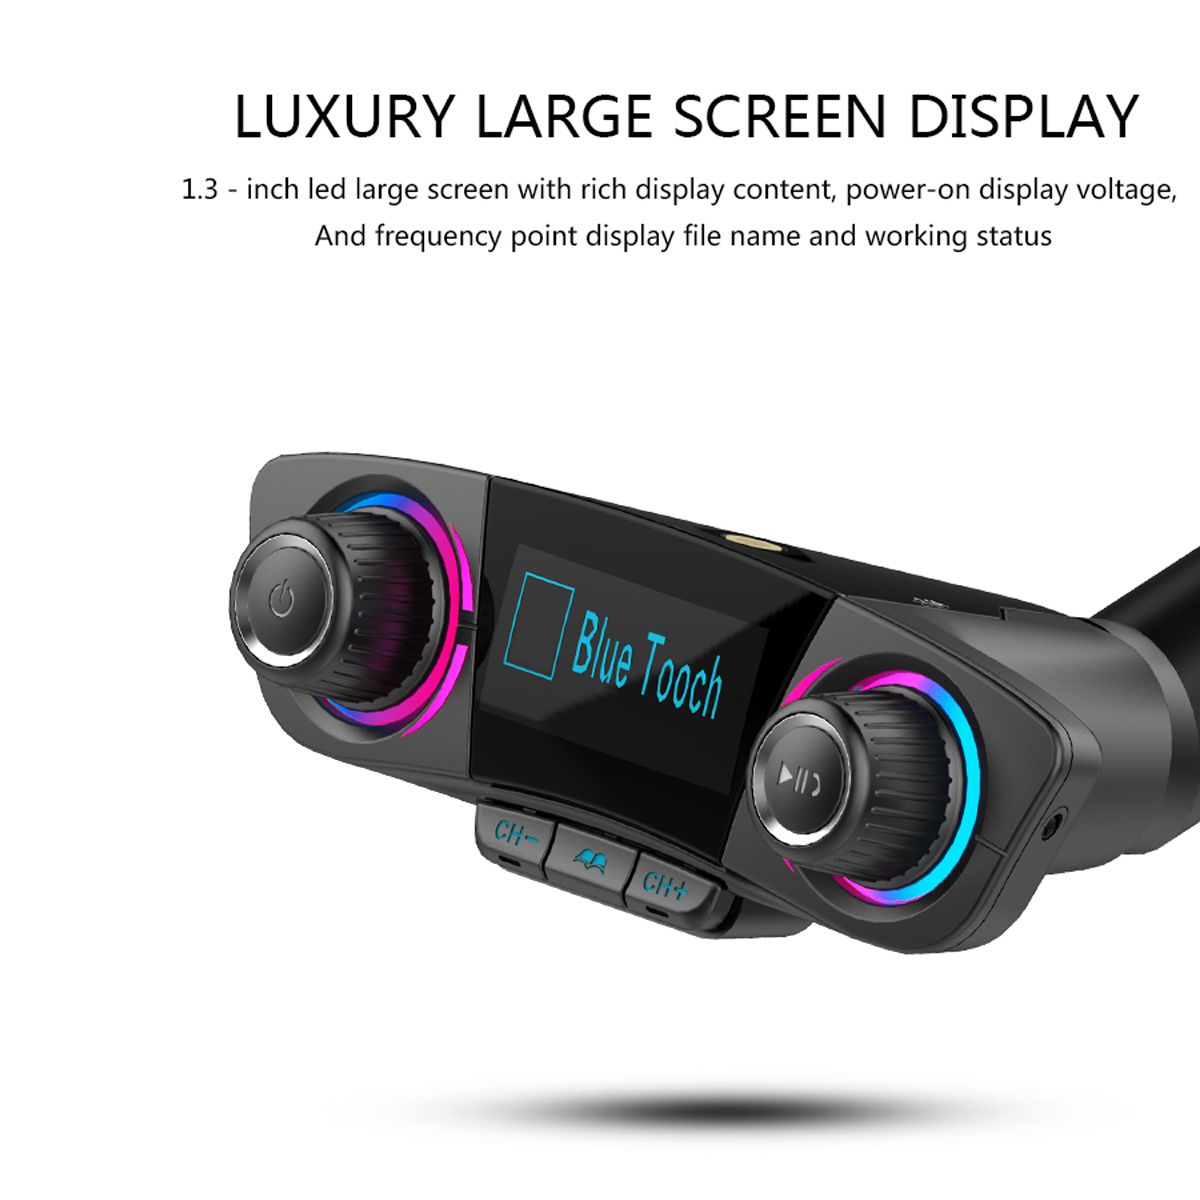 Wireless-bluetooth-LCD-Car-MP3-FM-Transmitter-AUX-USB-Disk-Charger-Handsfree-FM-1384652